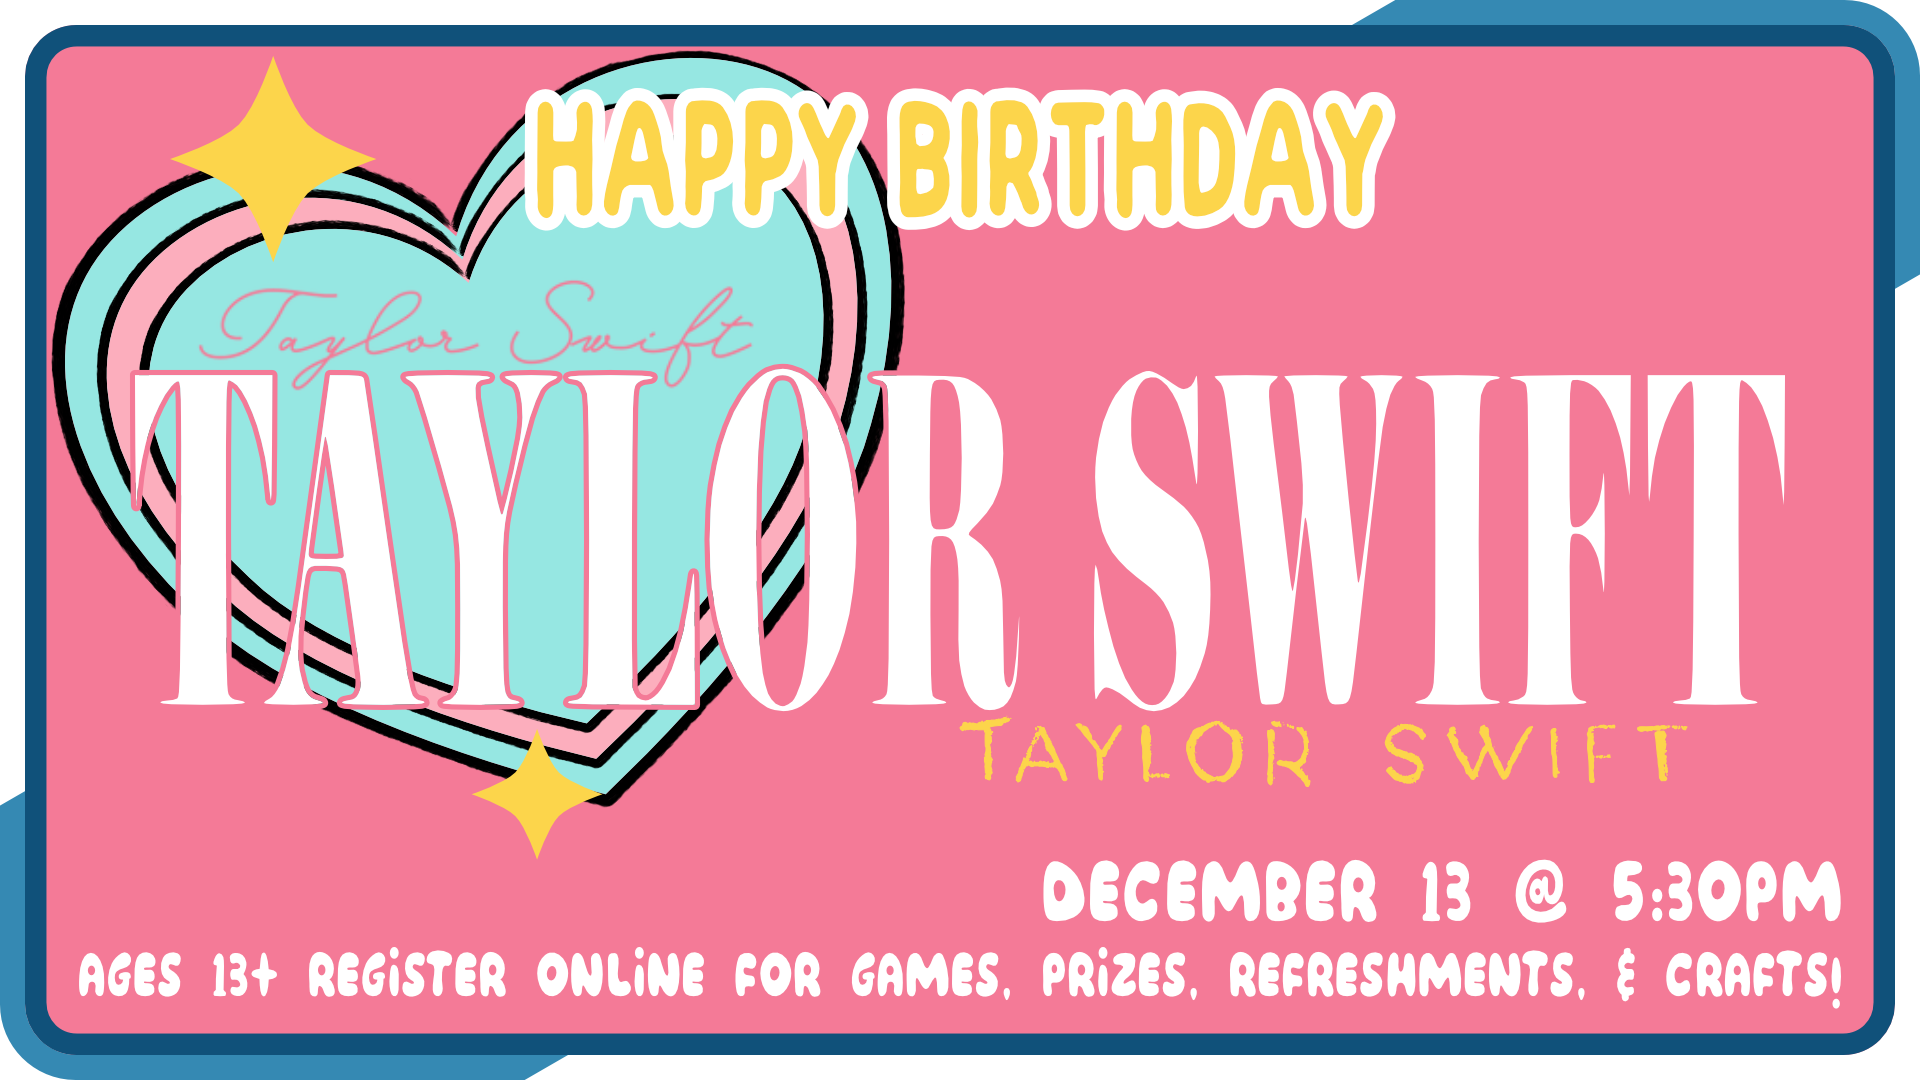 Happy Birthday Taylor Swift, December 13th at 5:30pm, registration required, 30 seats total, intended for ages 13+